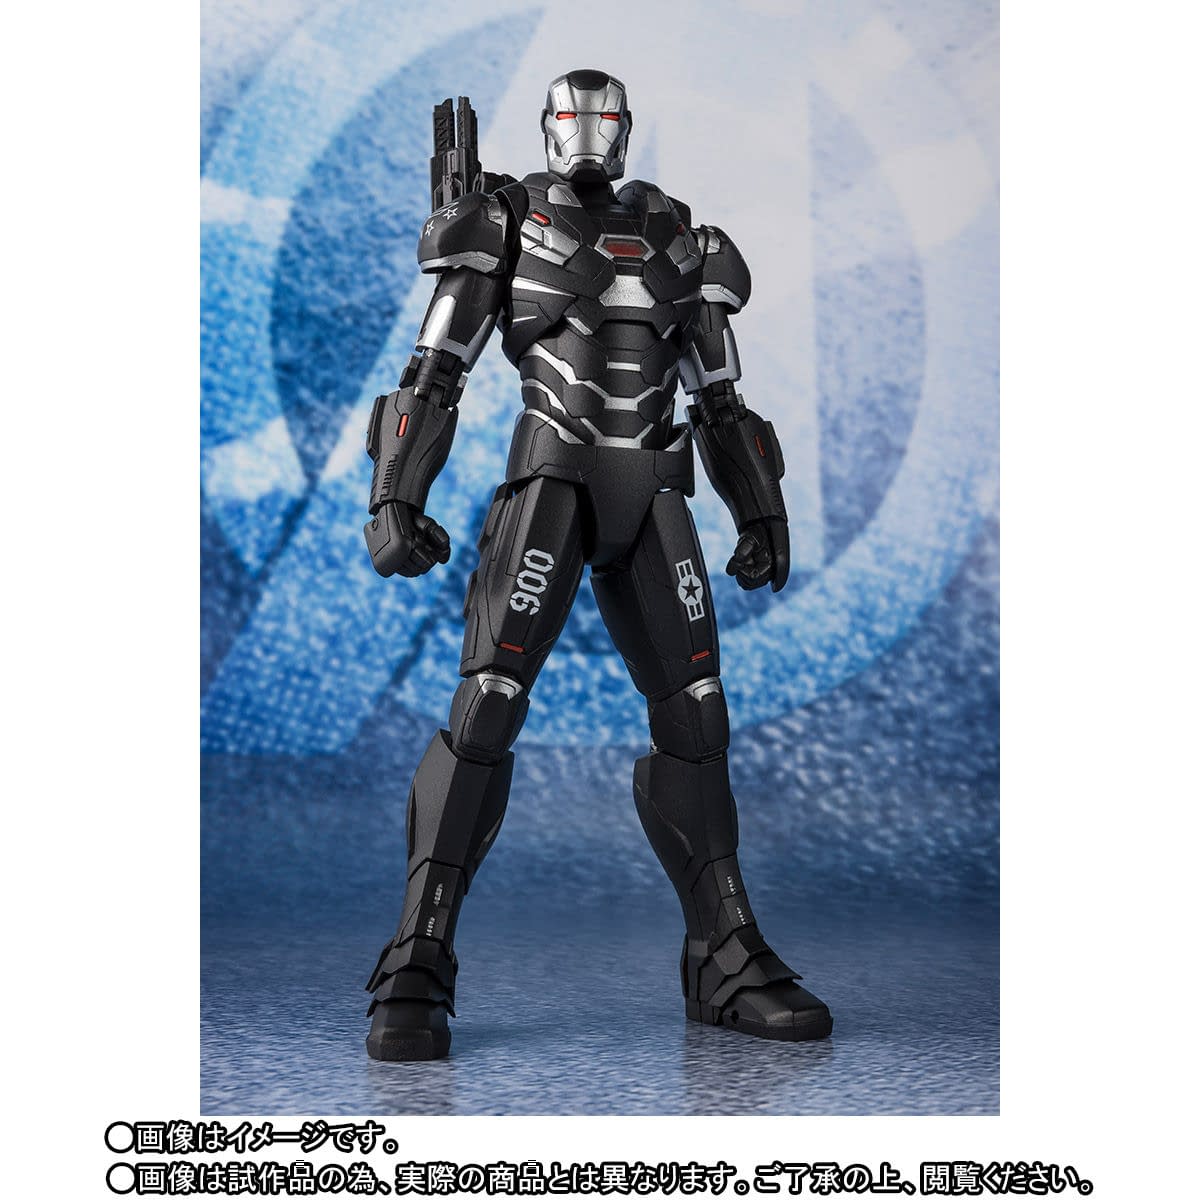 War Machine Joins the "Endgame" with New S.H Figuarts Figure